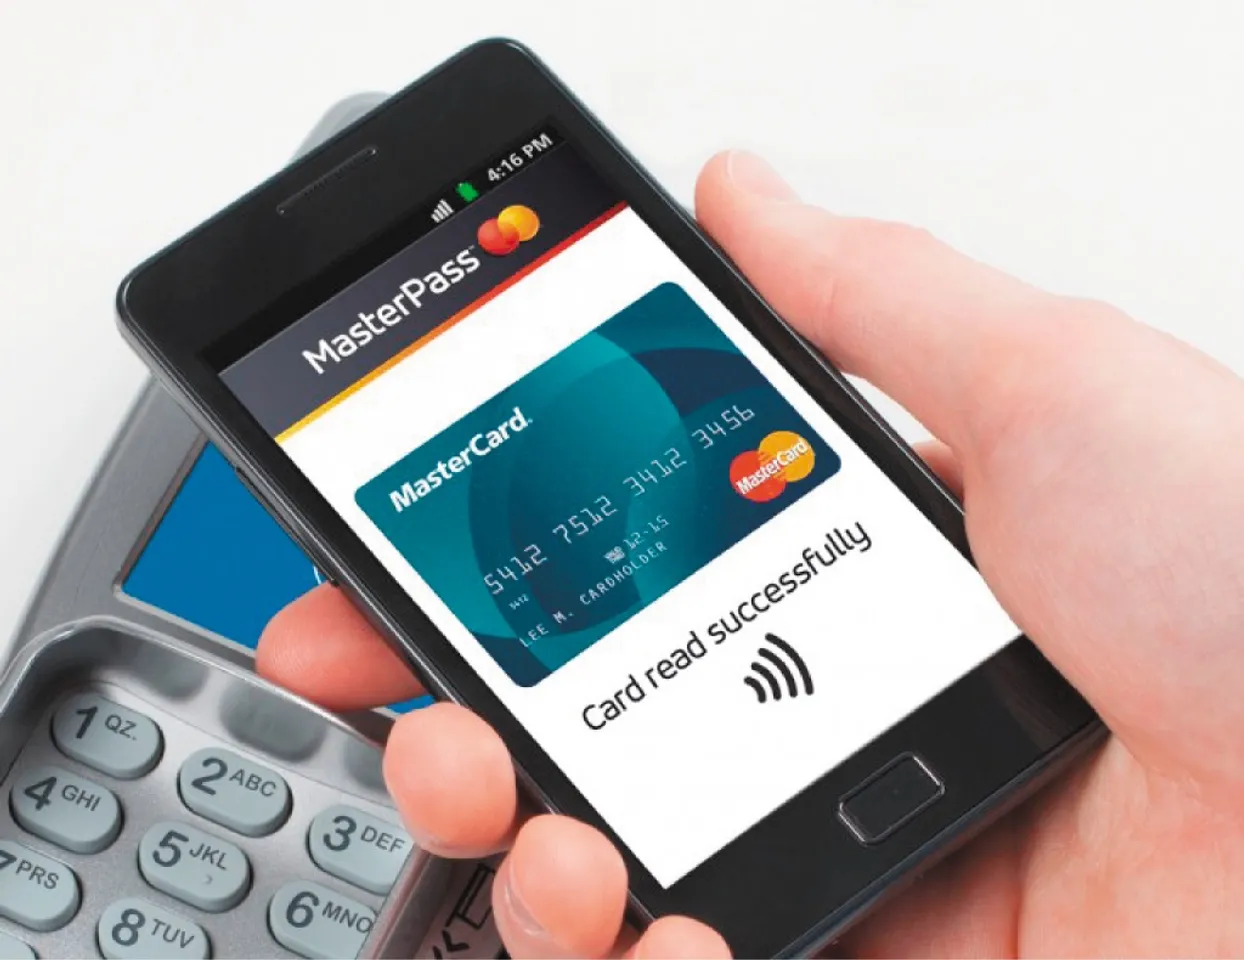 CIOLMastercard ties up with Pine Labs for safe and speedy contactless payments